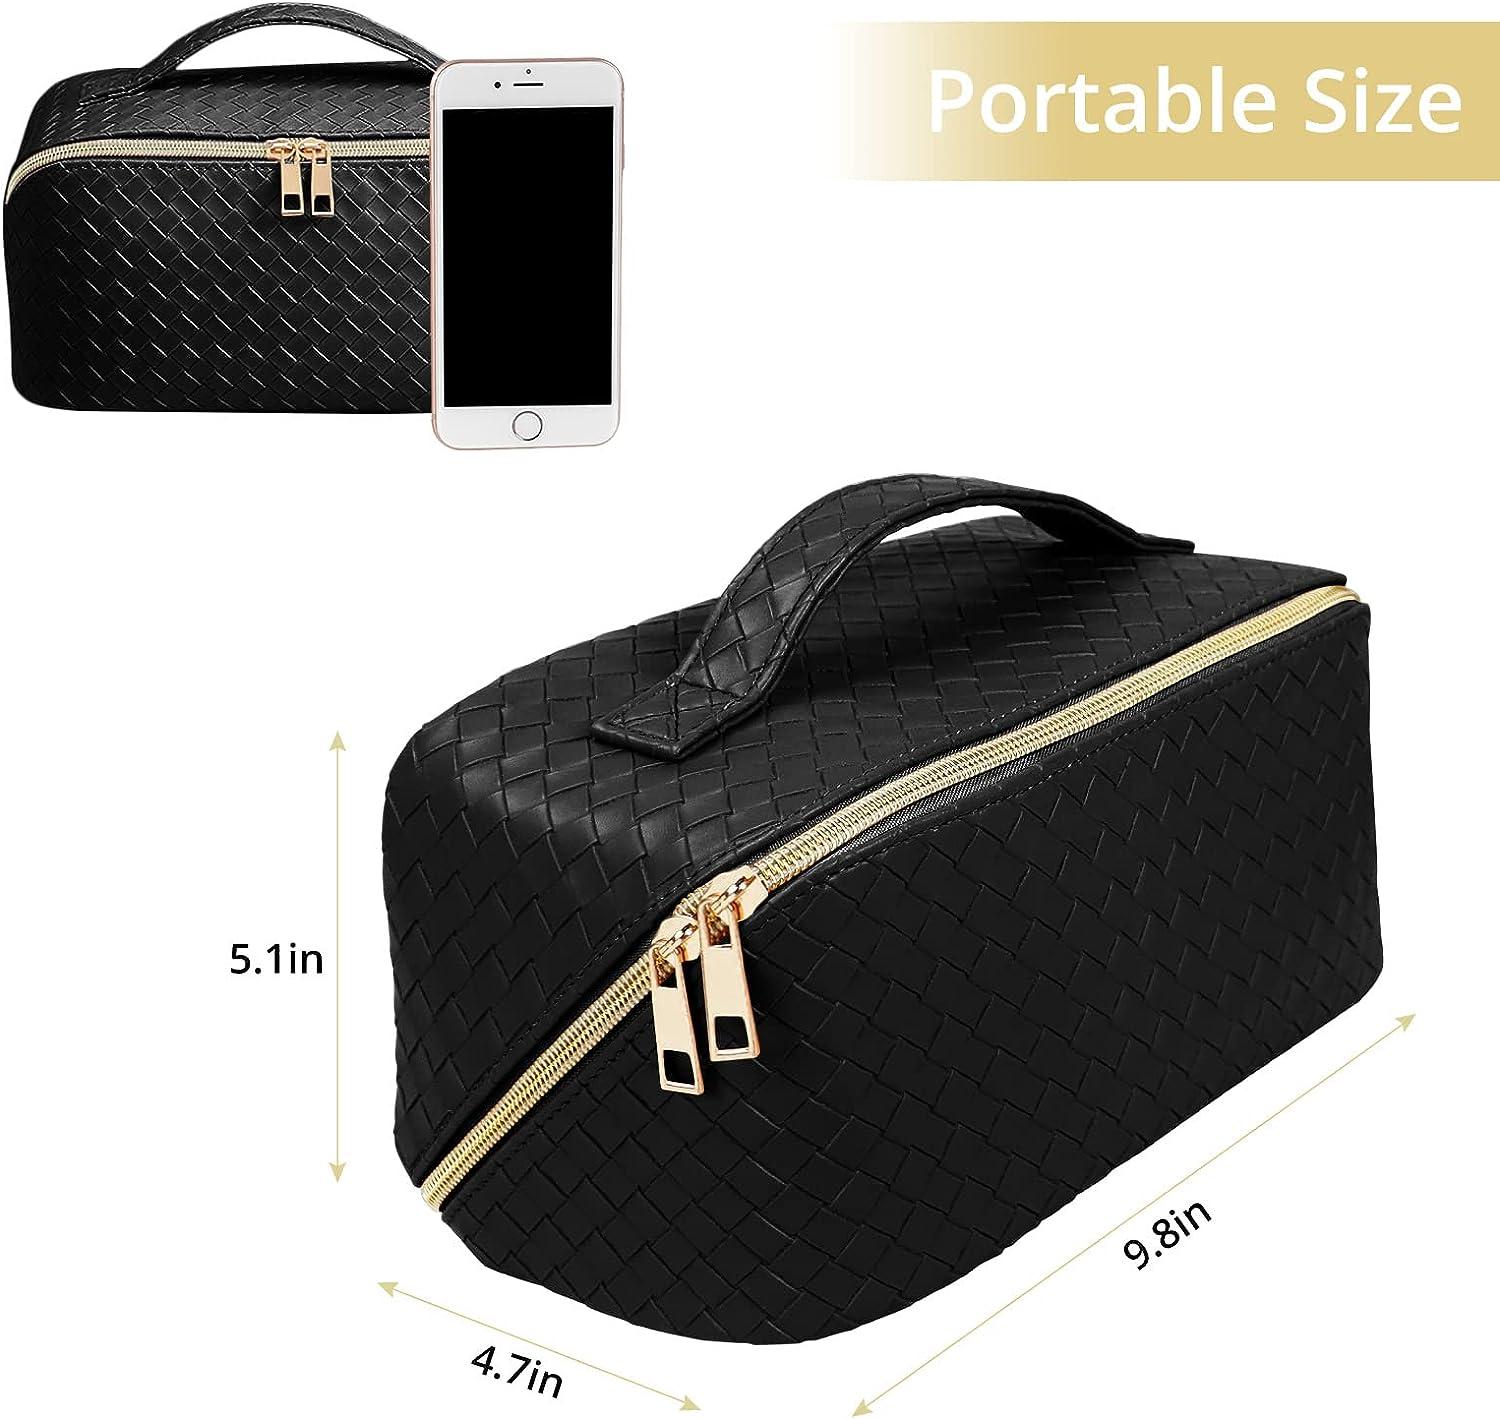  Travel Makeup Bag for Women Large Capacity Cosmetic Bag  Waterproof Black Checkered Portable PU Leather Toiletry Bag Organizer  Makeup Brushes Storage Bag with Dividers and Handle : Beauty & Personal